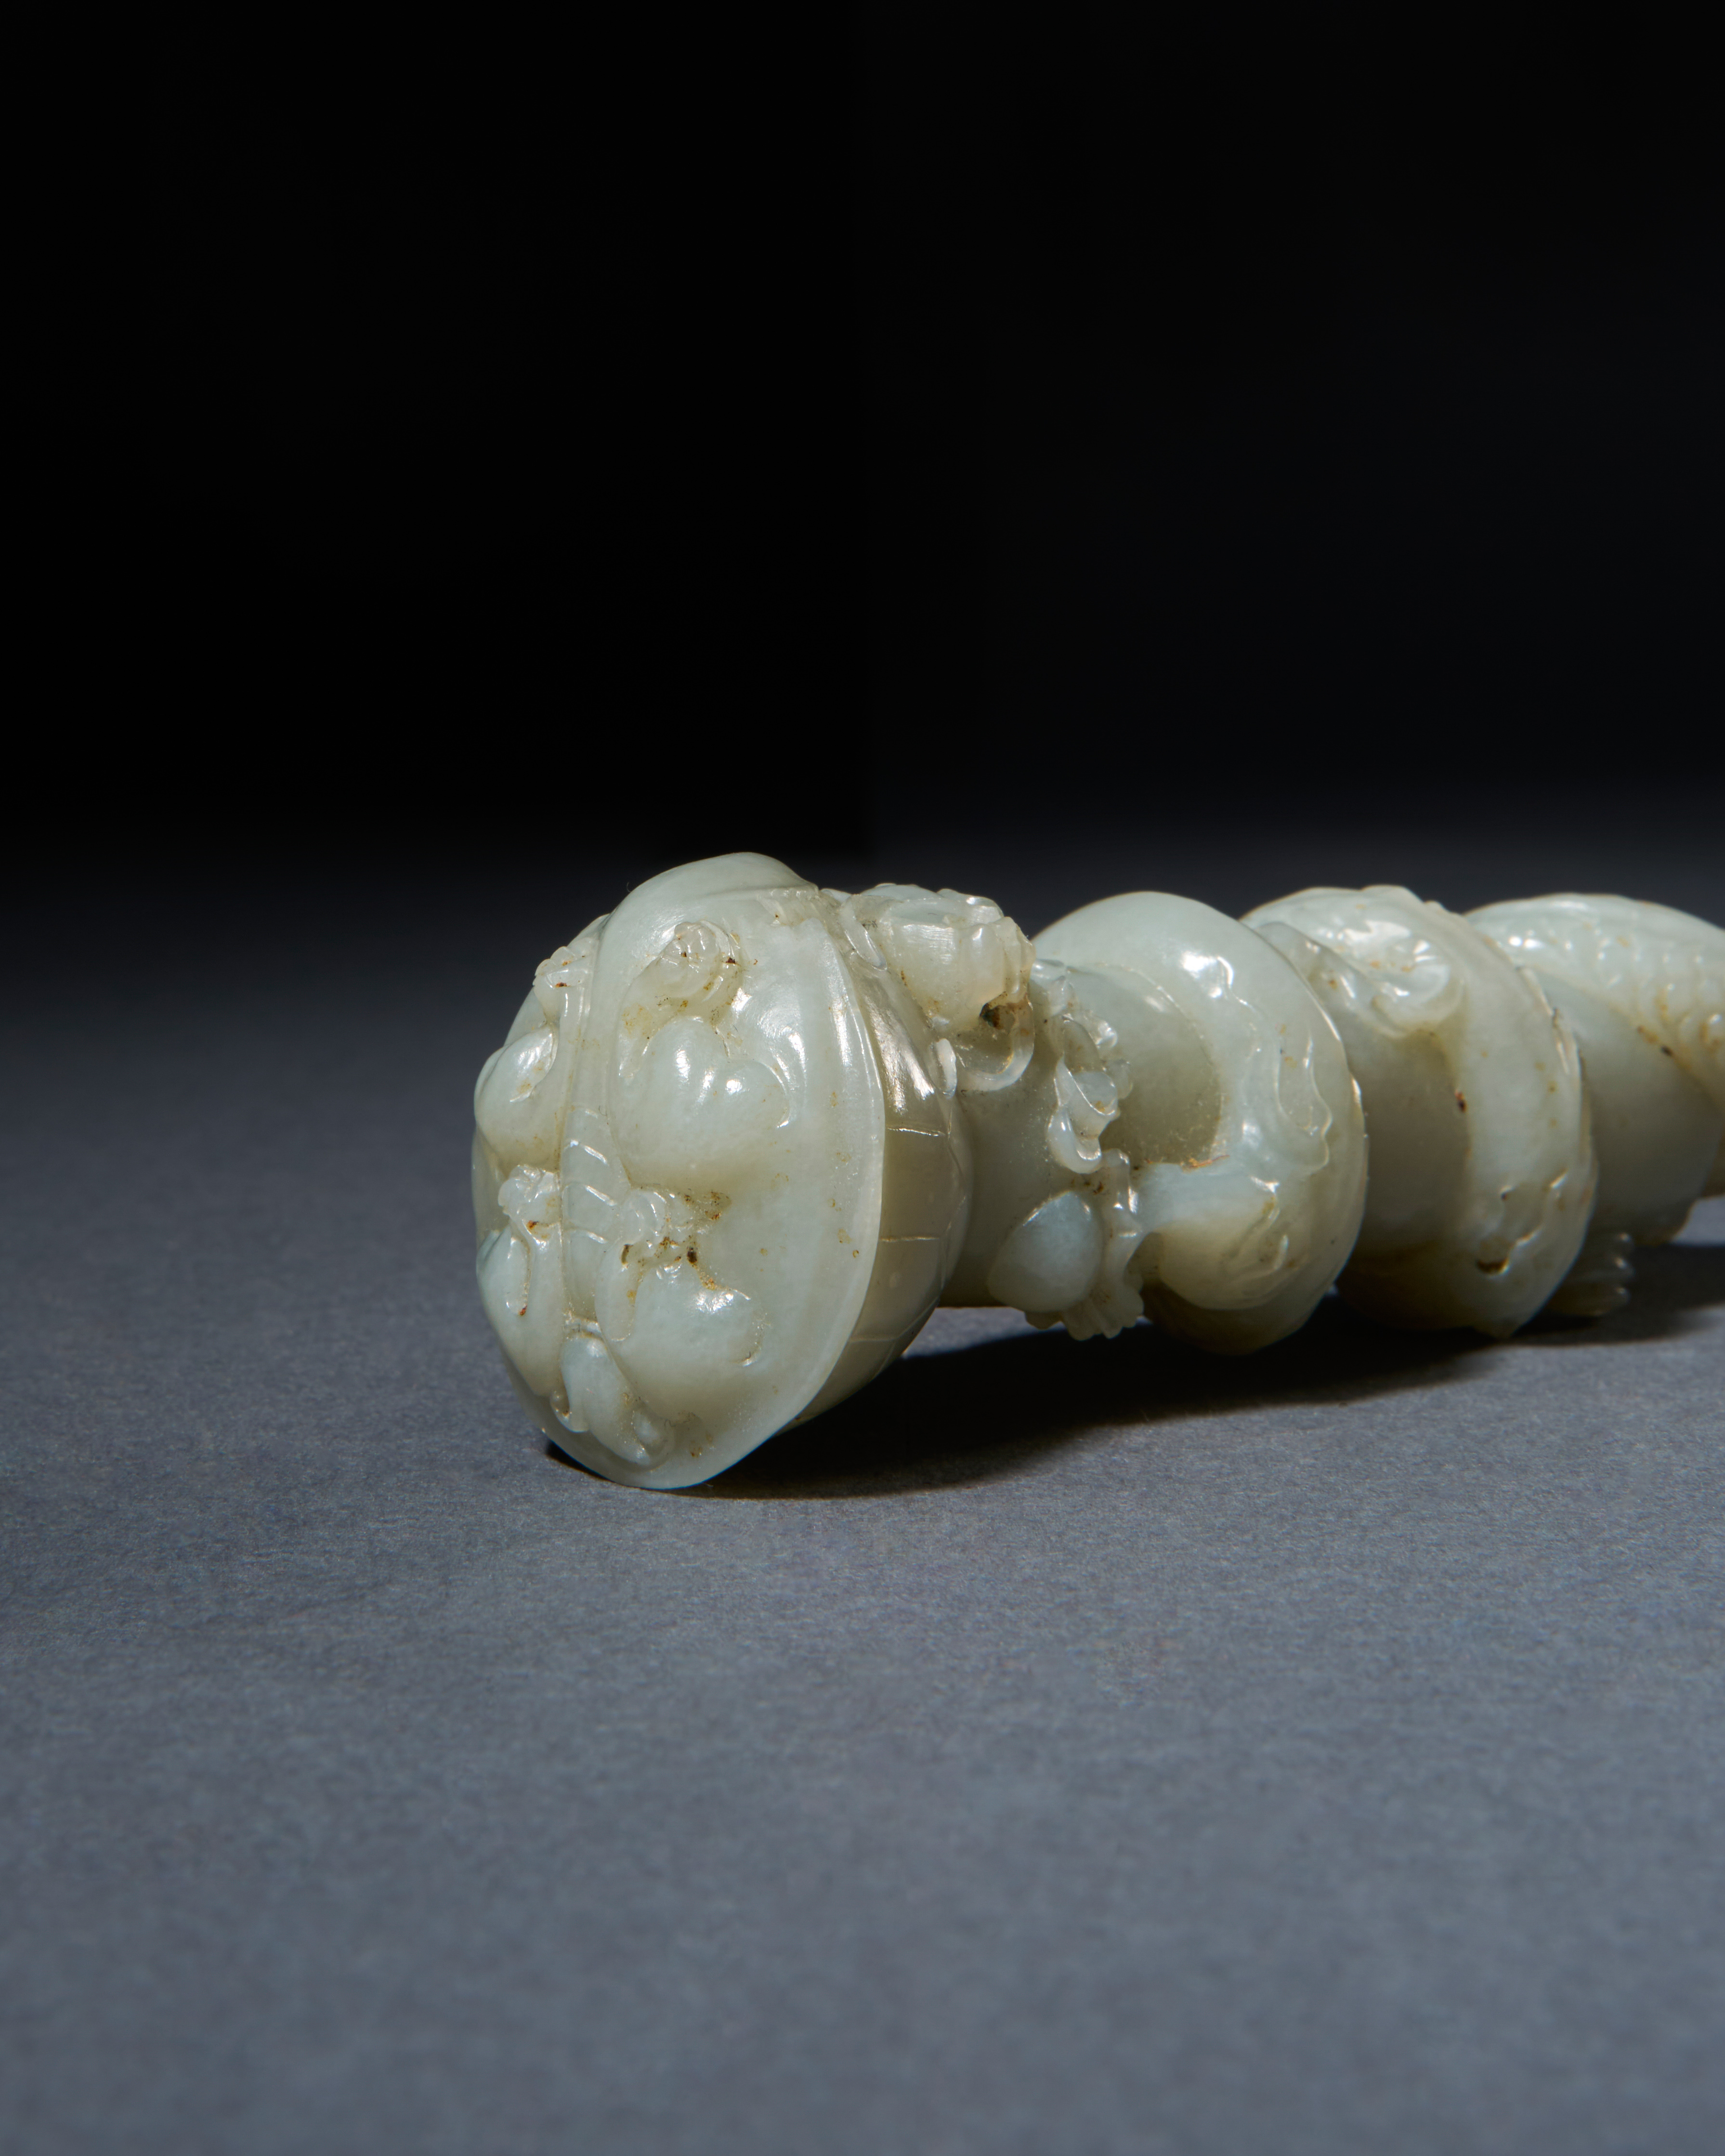 A LARGE CHINESE JADE "DRAGON" HANDLE, QING DYNASTY (1644-1911) - Image 4 of 4